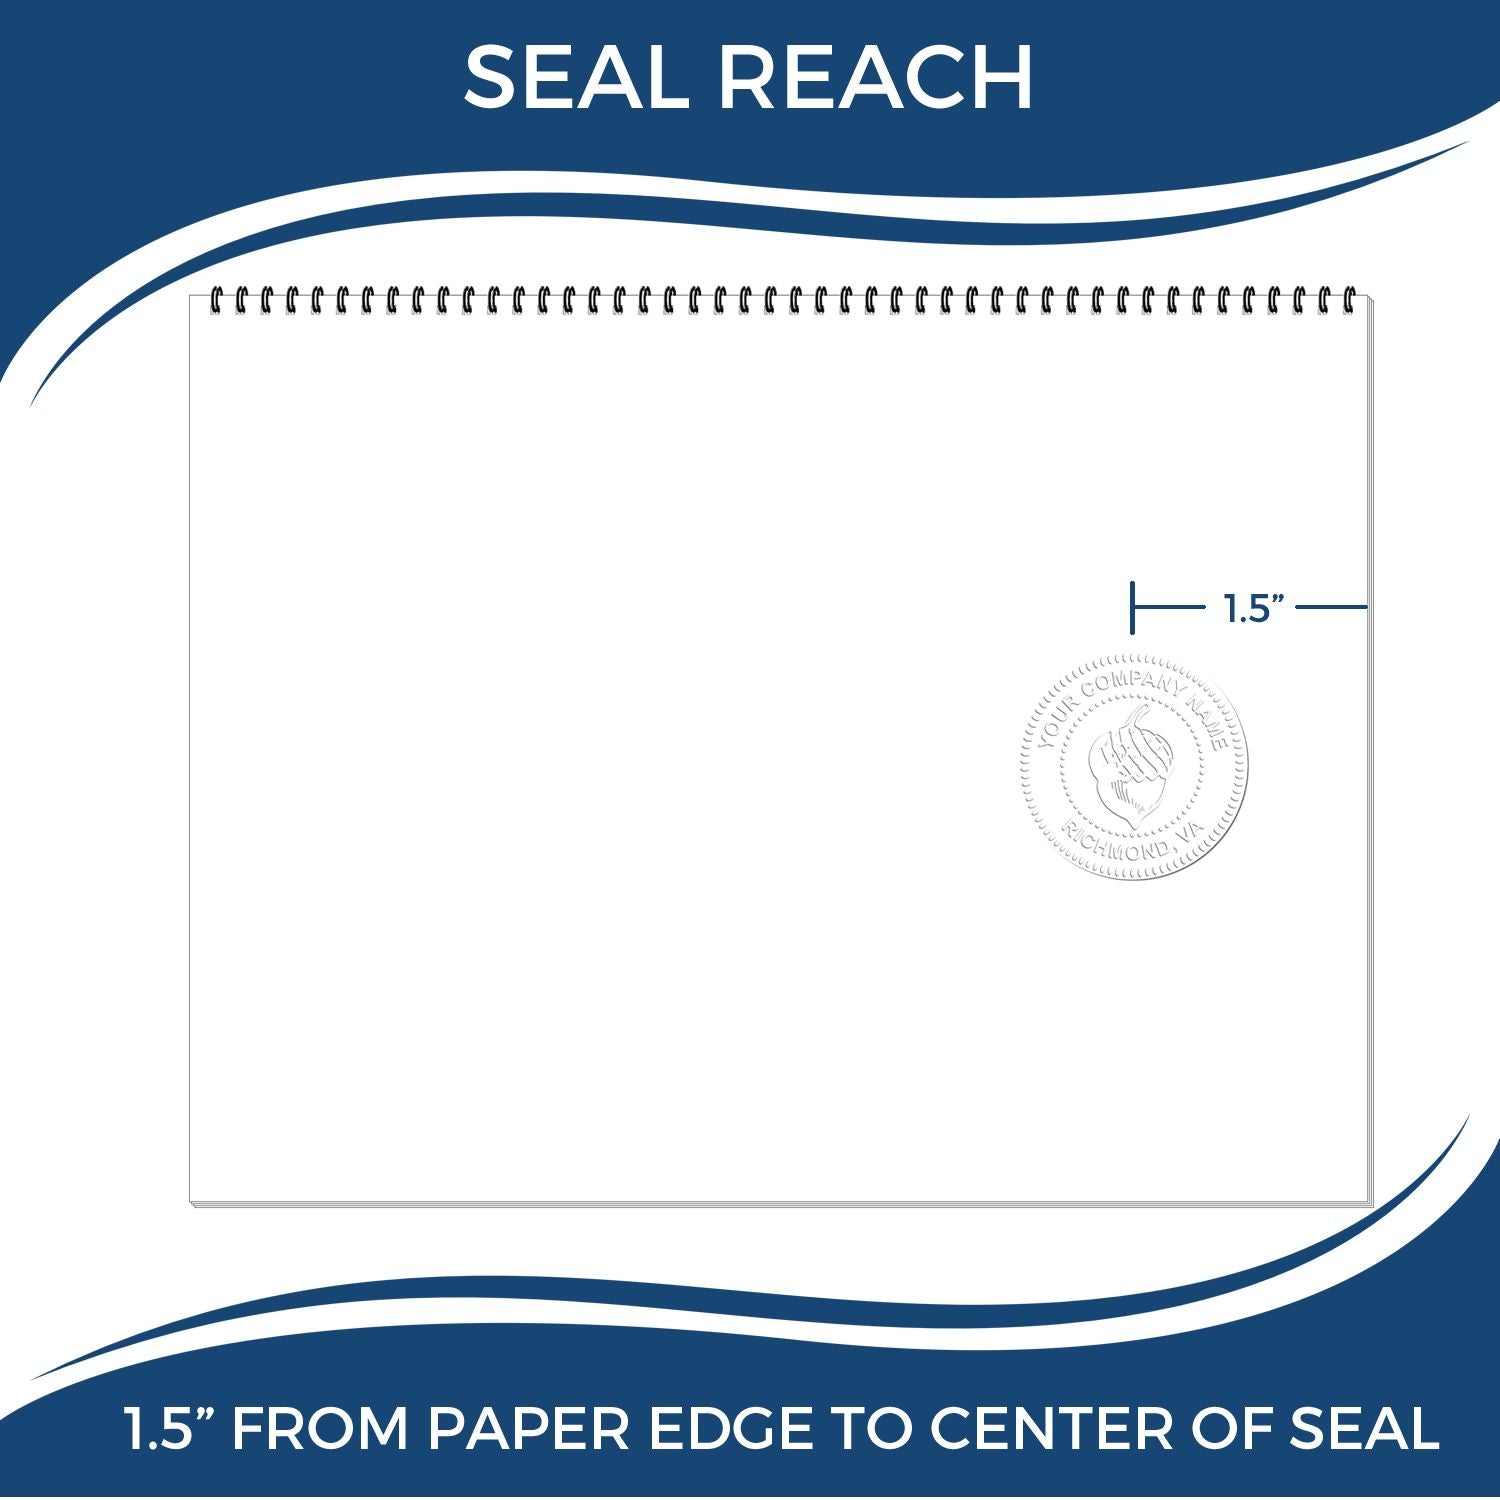 An infographic showing the seal reach which is represented by a ruler and a miniature seal image of the Connecticut Desk Landscape Architectural Seal Embosser